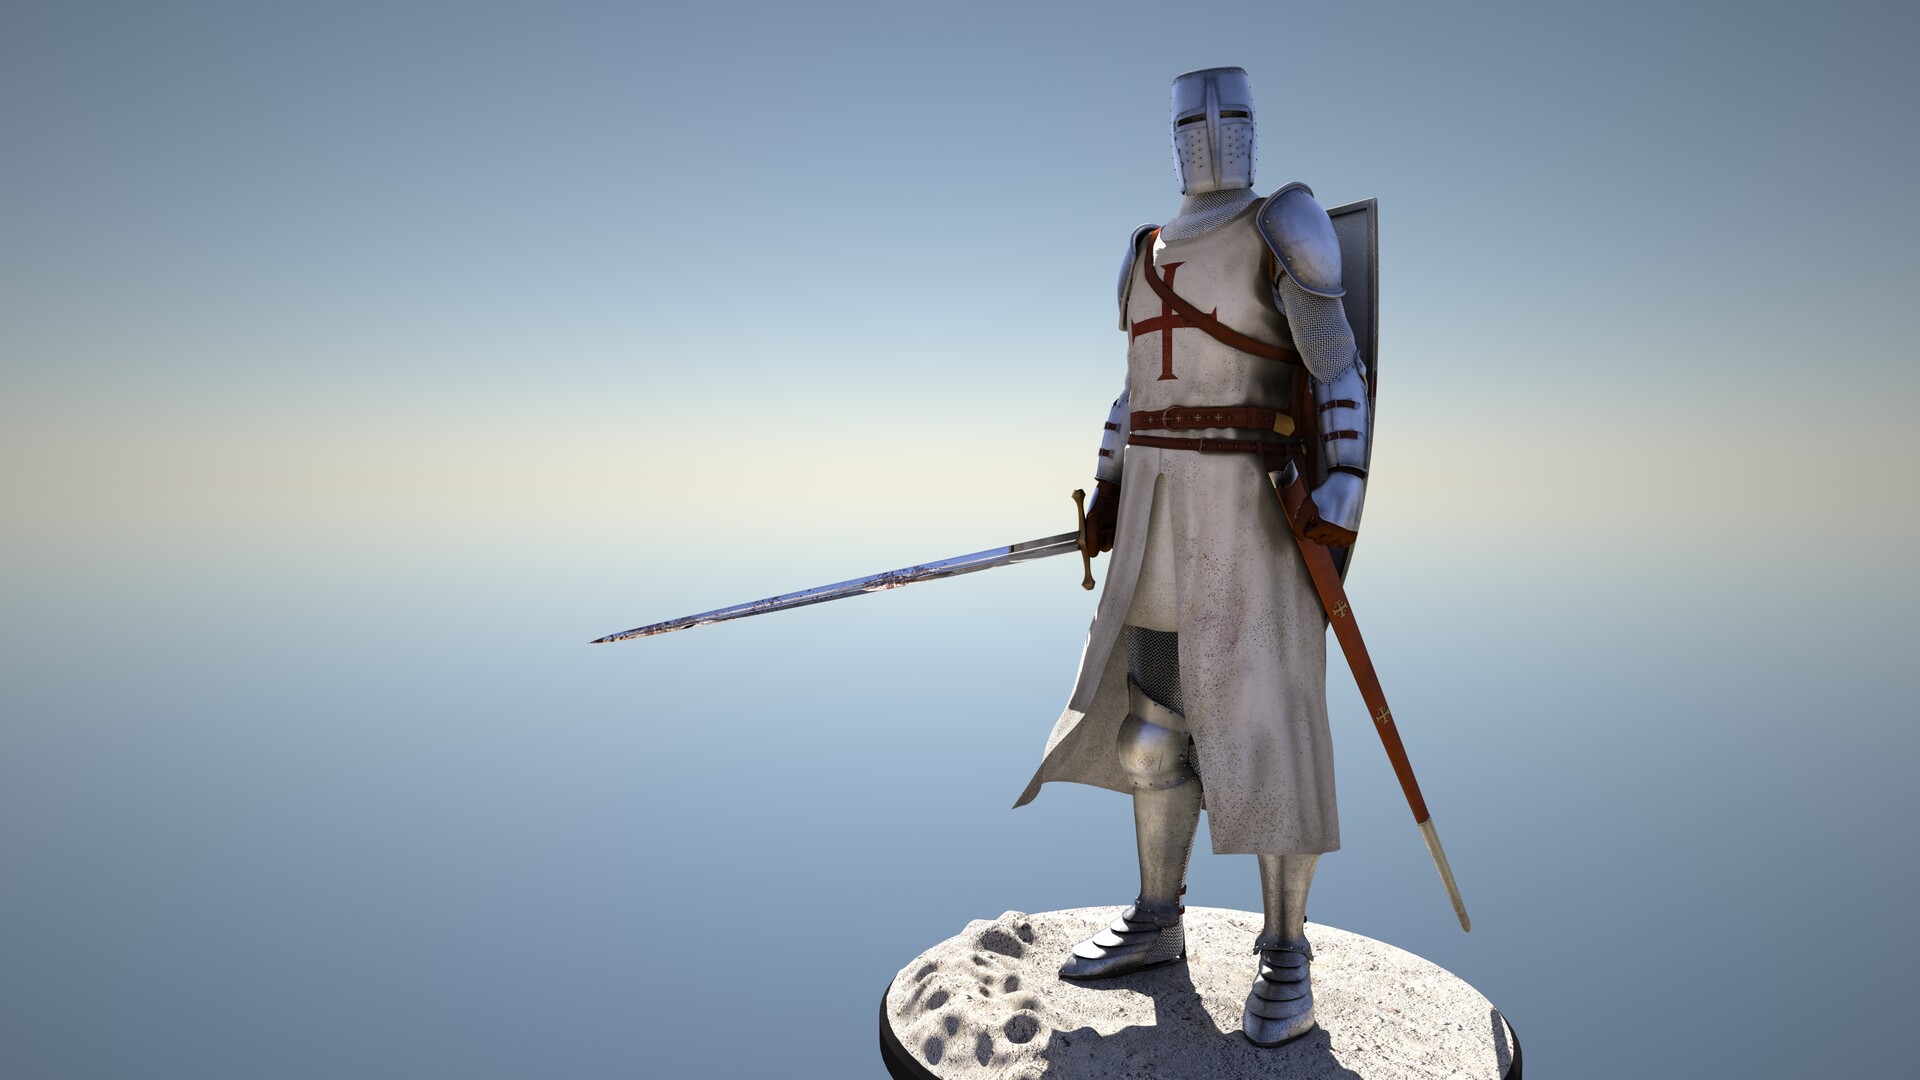 Knight Templar (with a bit of inventions) .